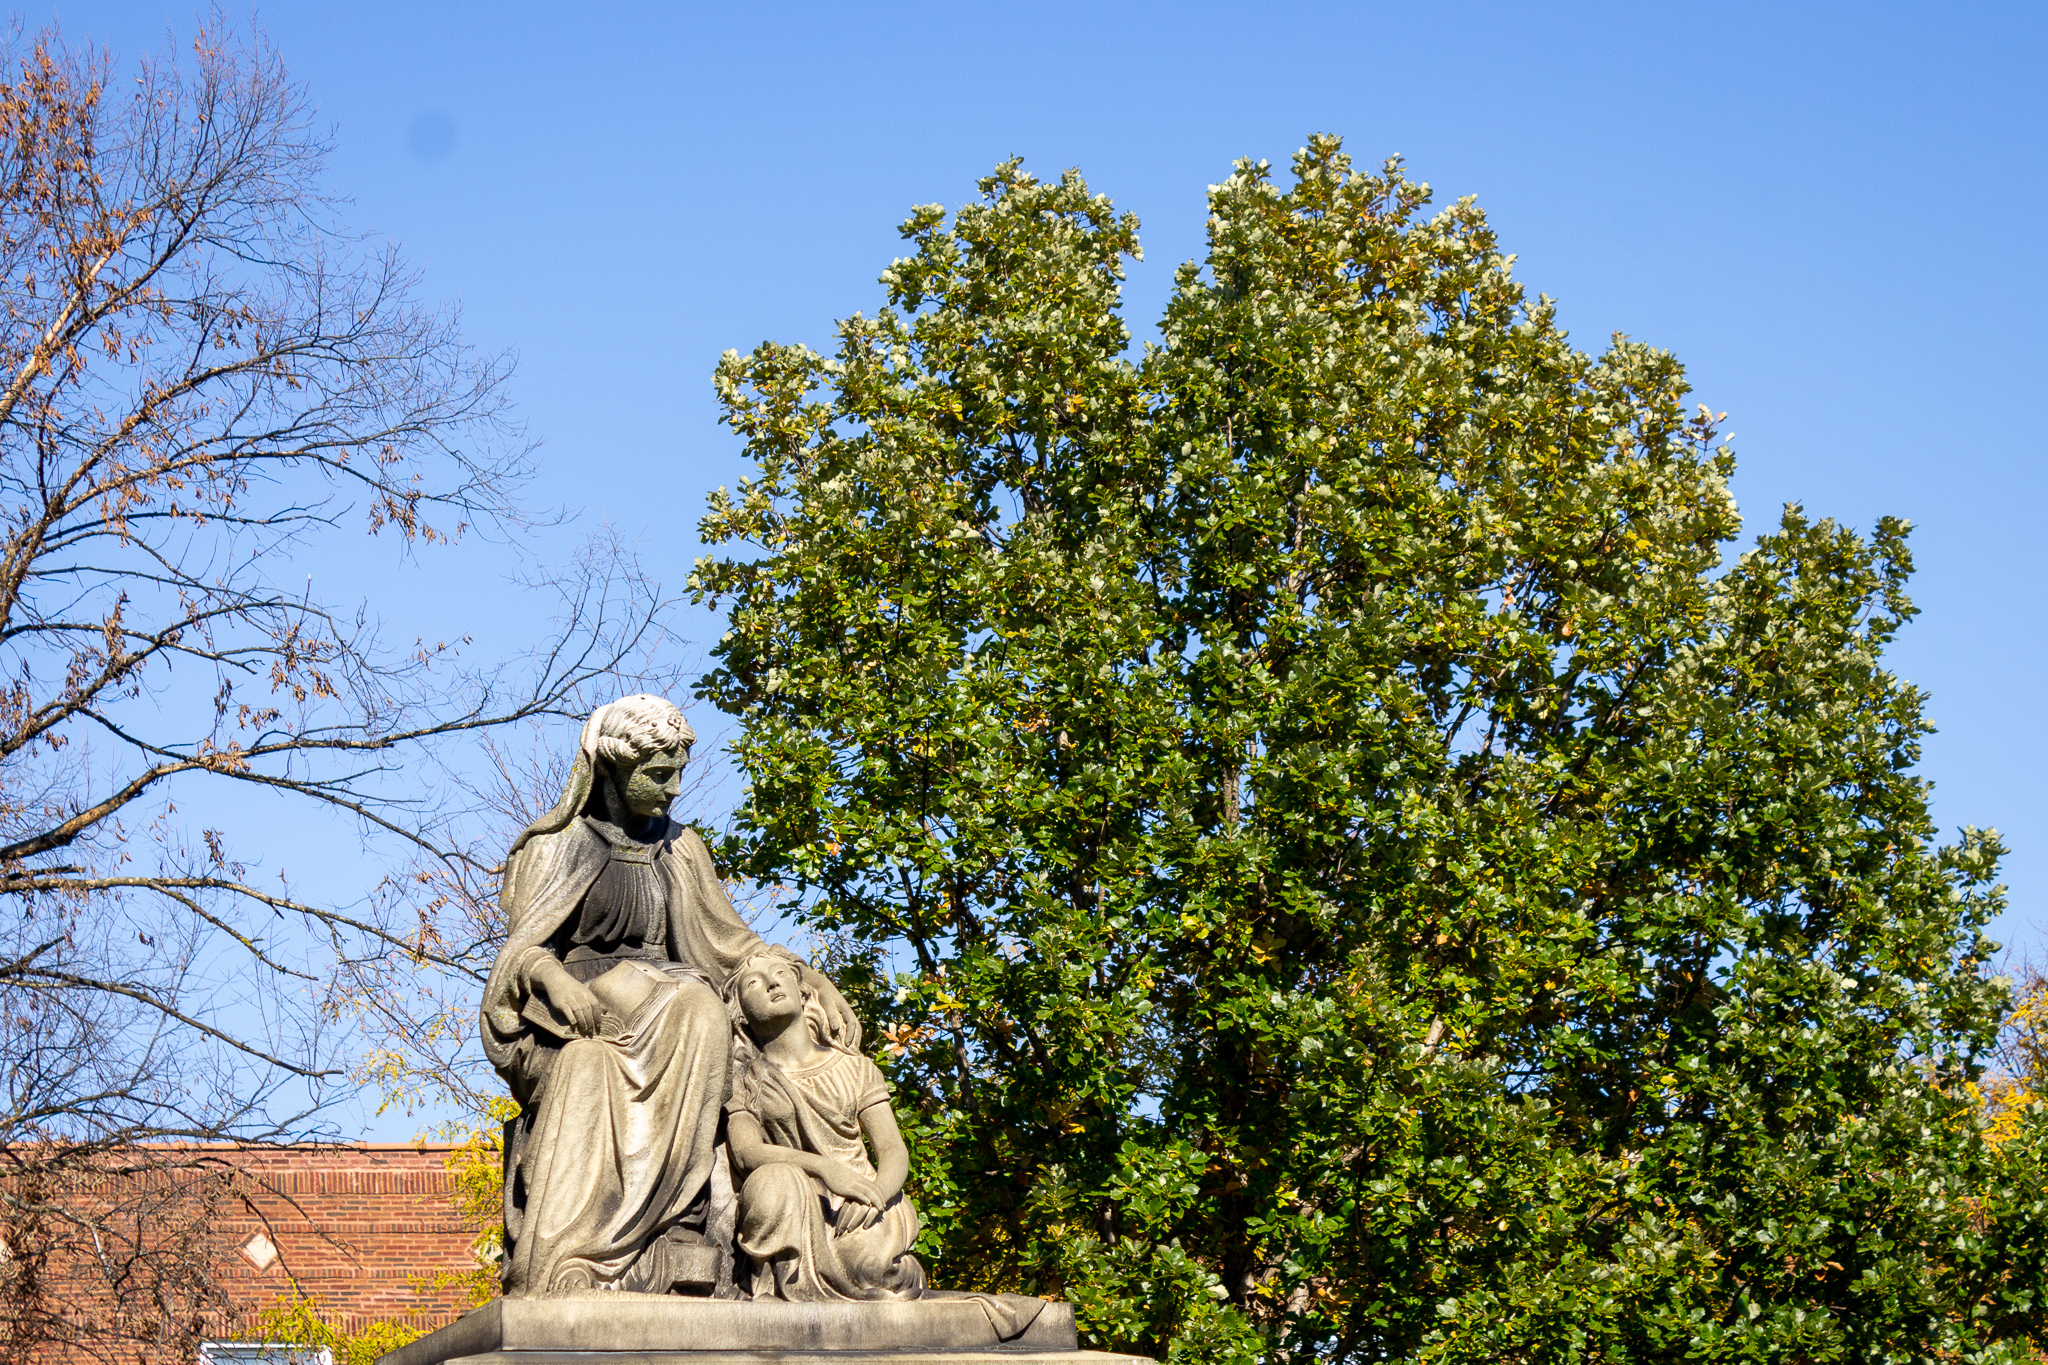 The top of a monument with a carved stone woman and child against a blue sky and large green tree